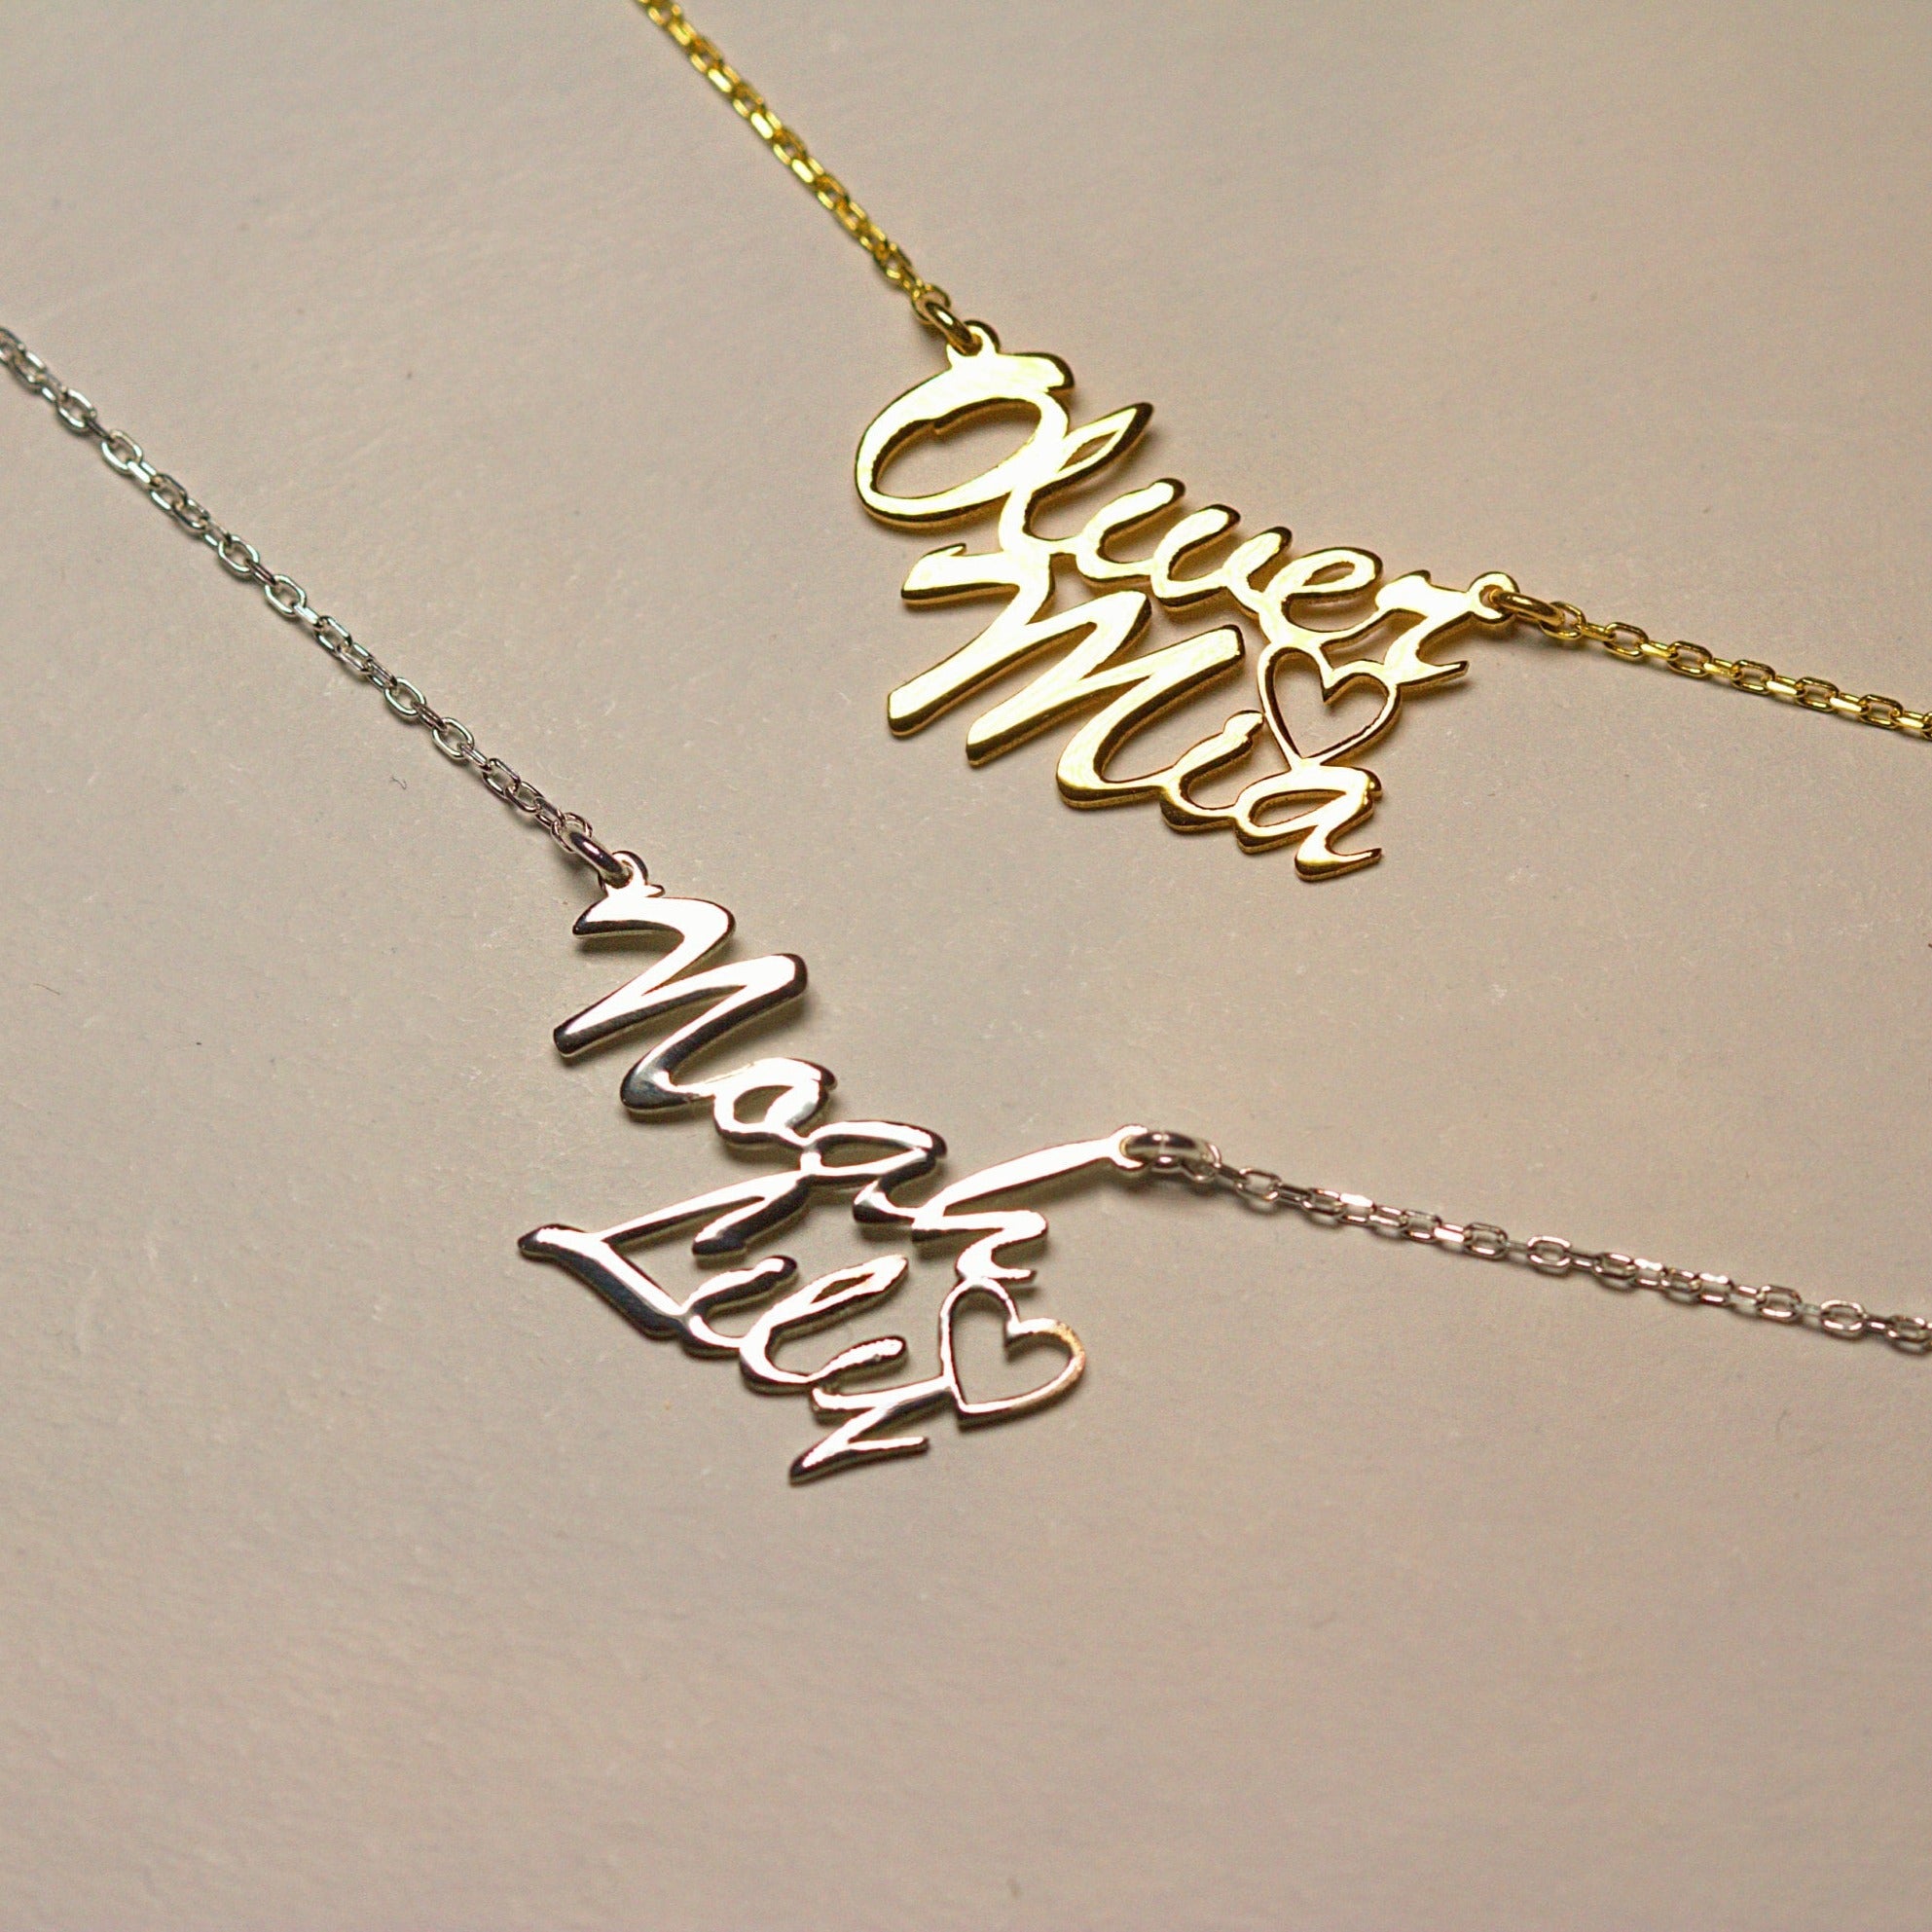 Personalized Sterling Silver Necklace for Mom with Kids names, Boy Girl  Child | eBay